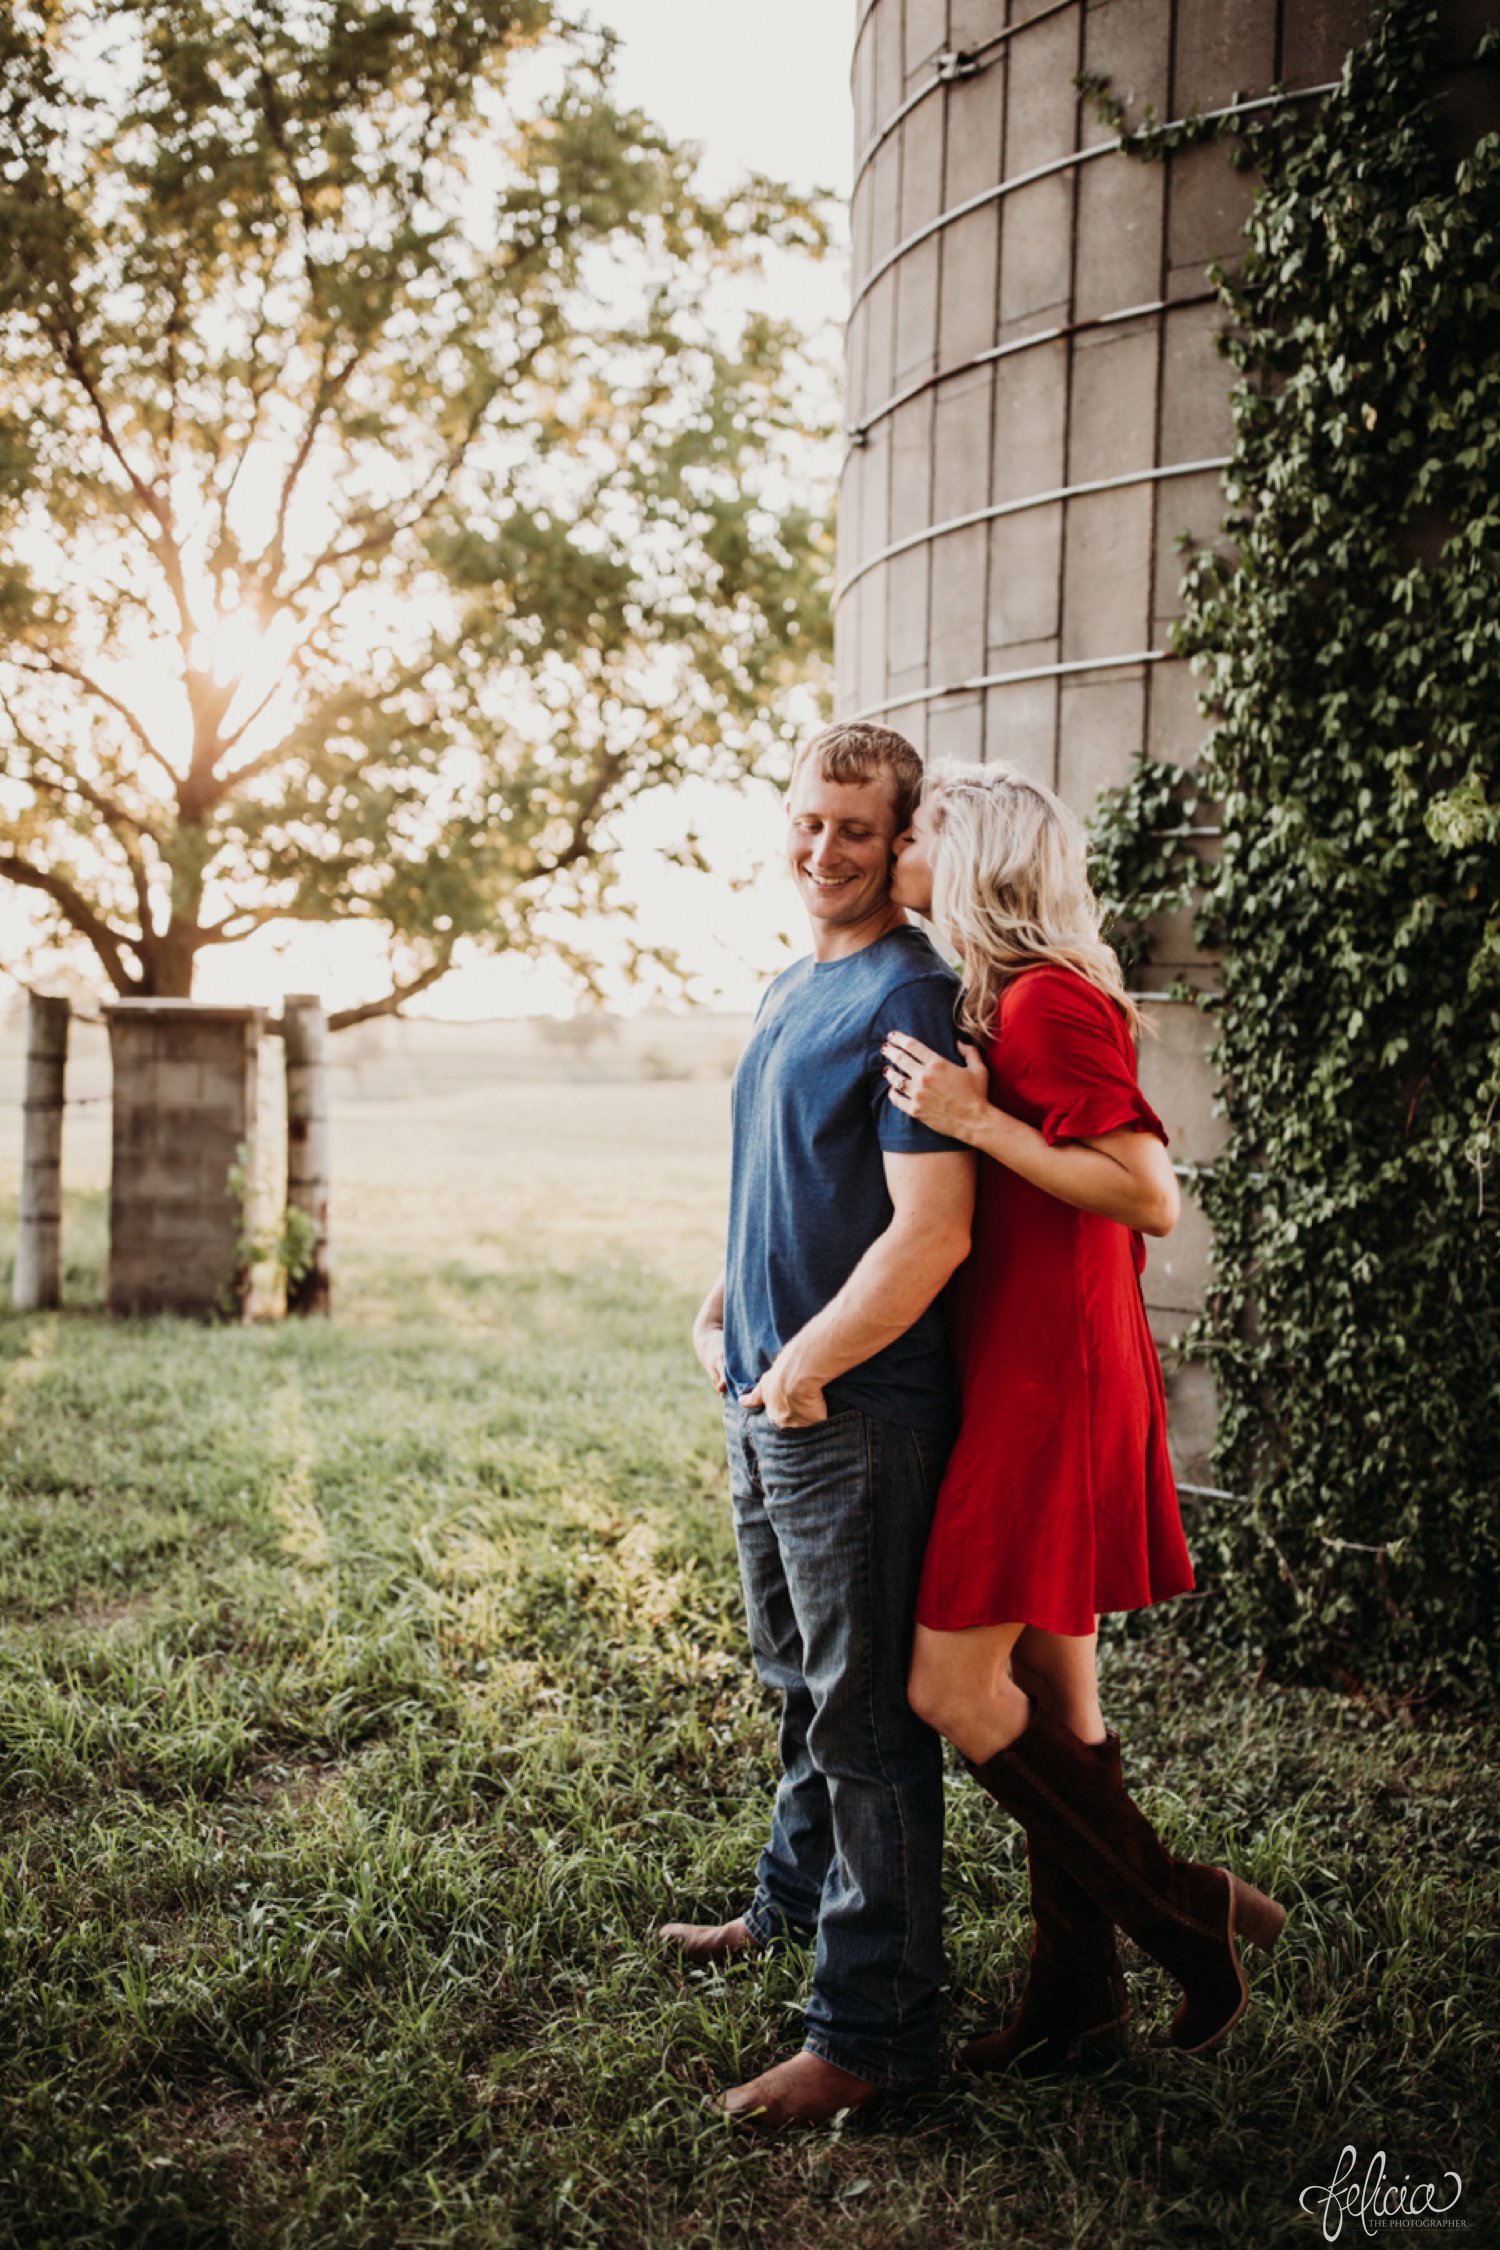 images by feliciathephotographer.com | destination wedding photographer | engagement | farmhouse | country | kansas city | sweet southern | red dress | nordstrom rack | unique halo diamond ring | casual | brown boots | amazon | cowboy | kiss | silos | 